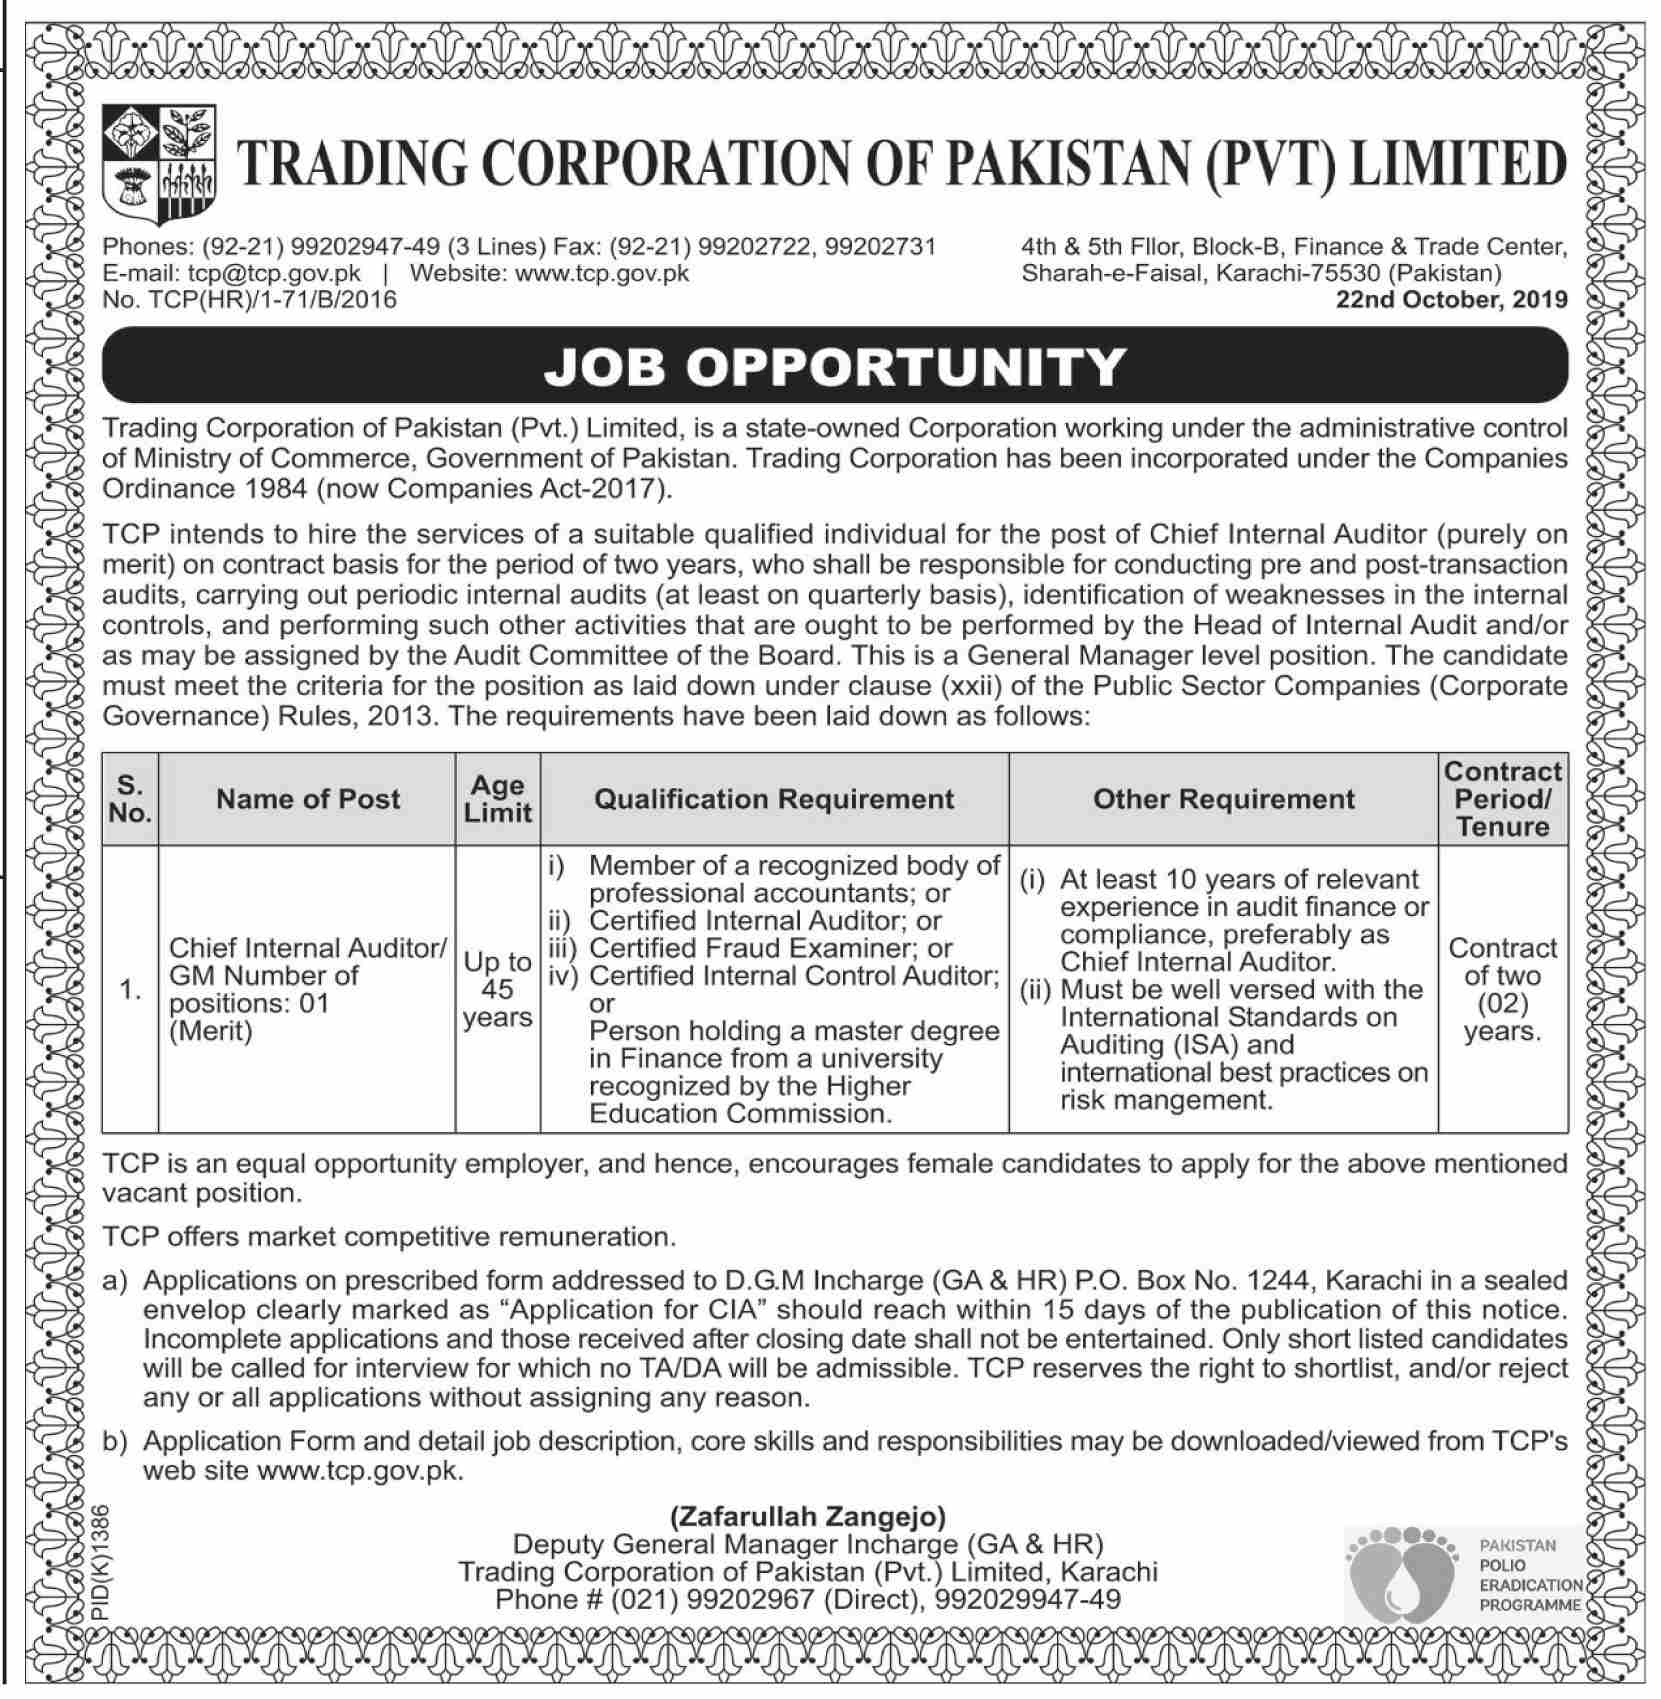 Jobs In Trading Corporation of Pakistan Private Limited 22 October 2019